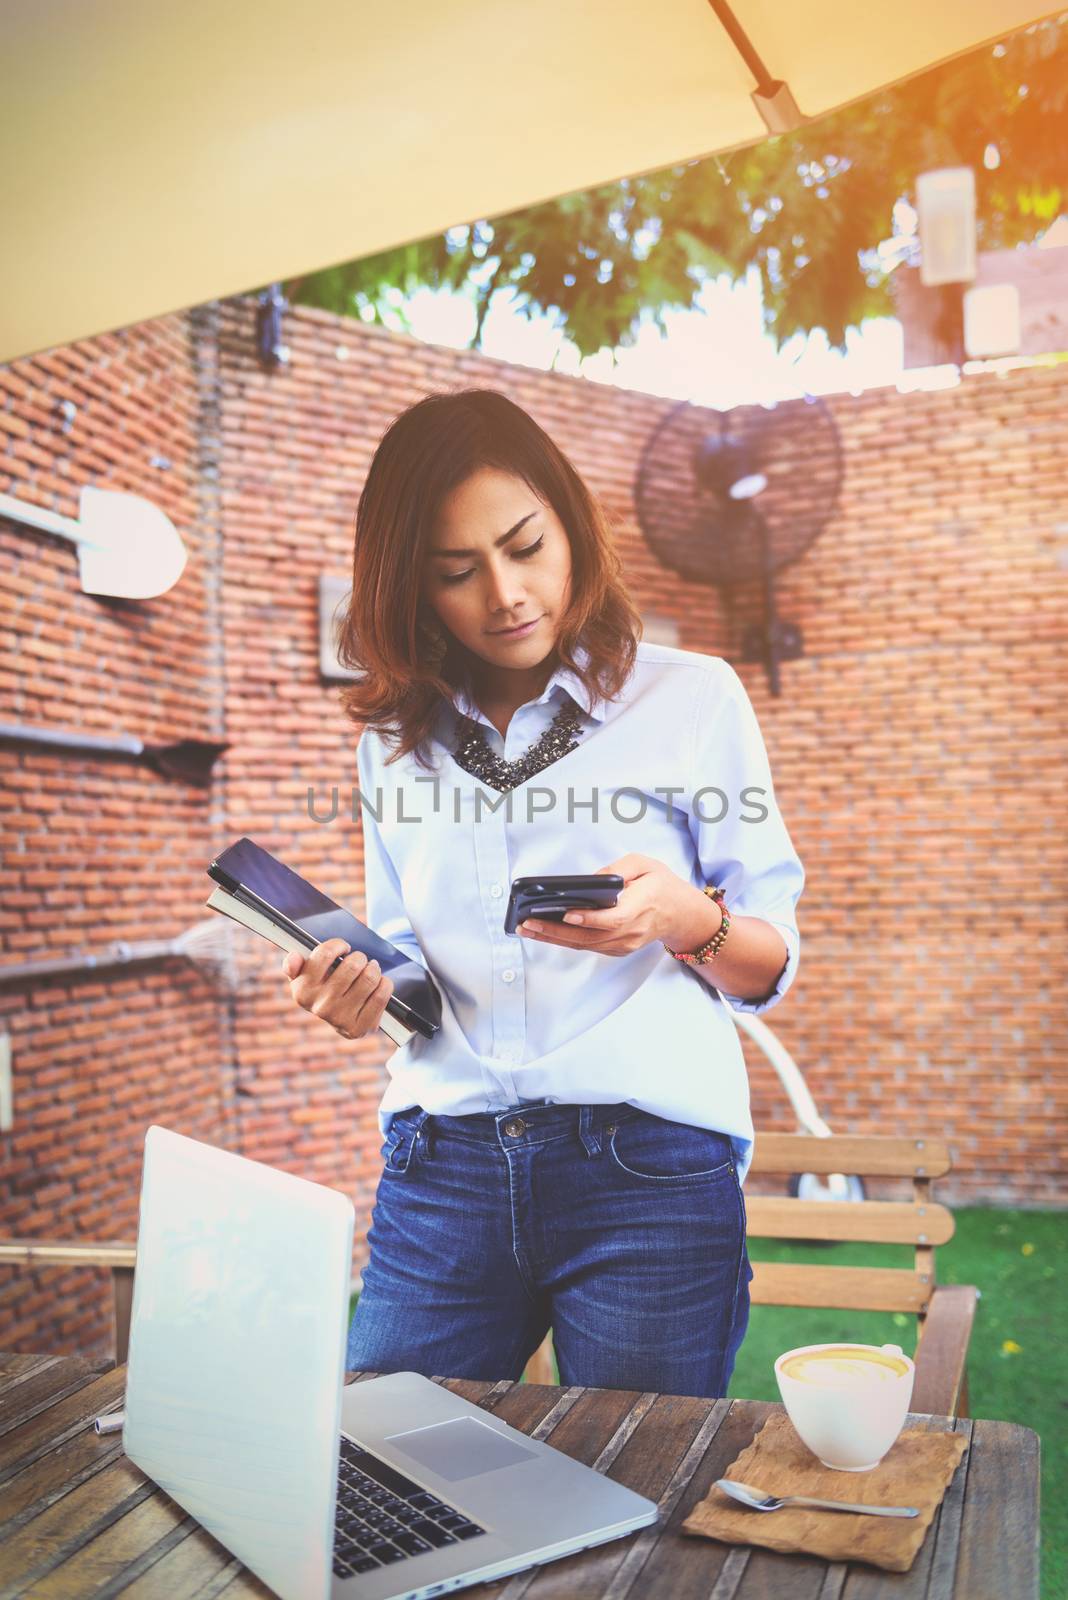 Asian women are using their mobile phone by PhairinThee